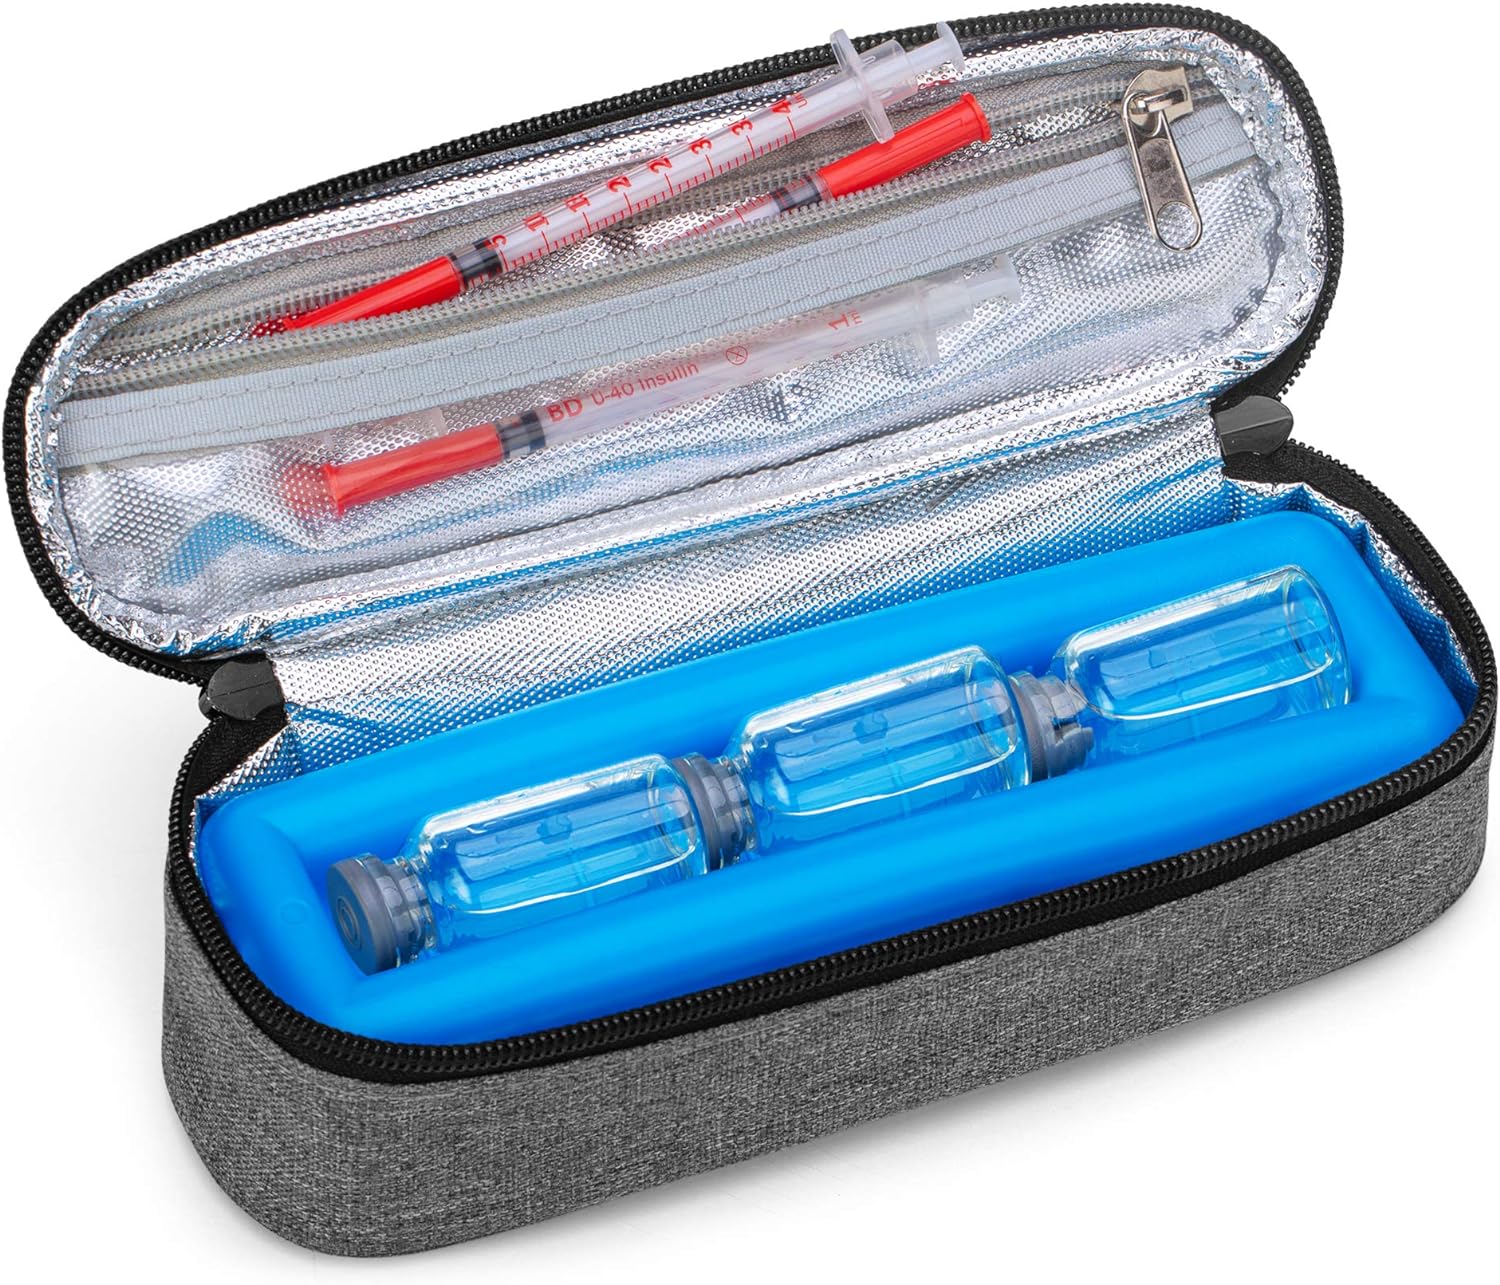 Luxja Insulin Case with an Ice Pack, Insulin Vial Protector Holds 3 Vials (10ml), Gray